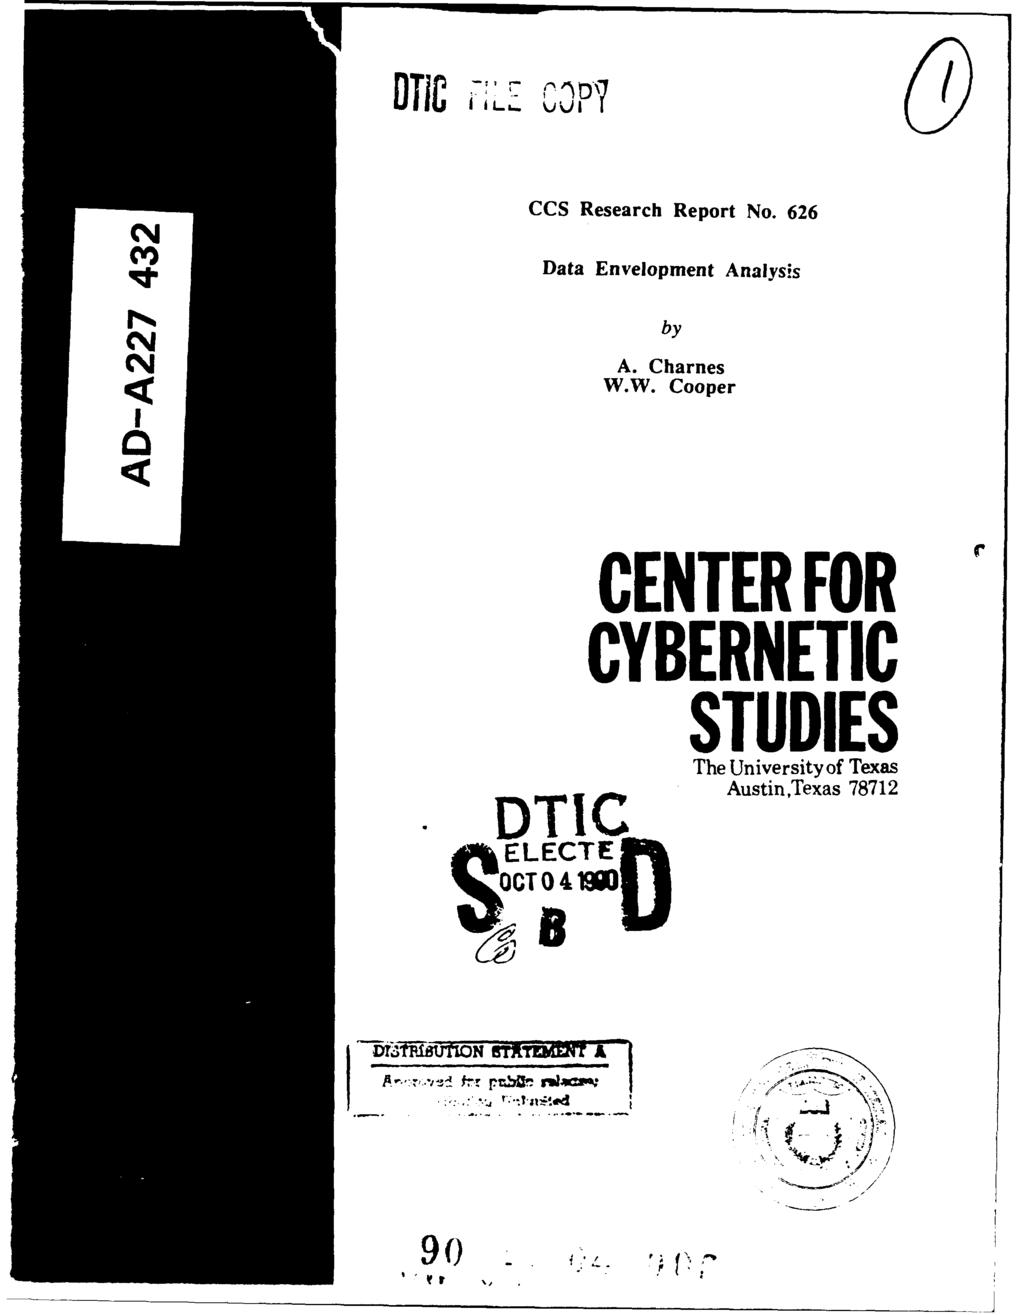 TIC 1 (2 CCS Research Report No. 626 Data Envelopment Analysis 1% by (A. Charnes W.